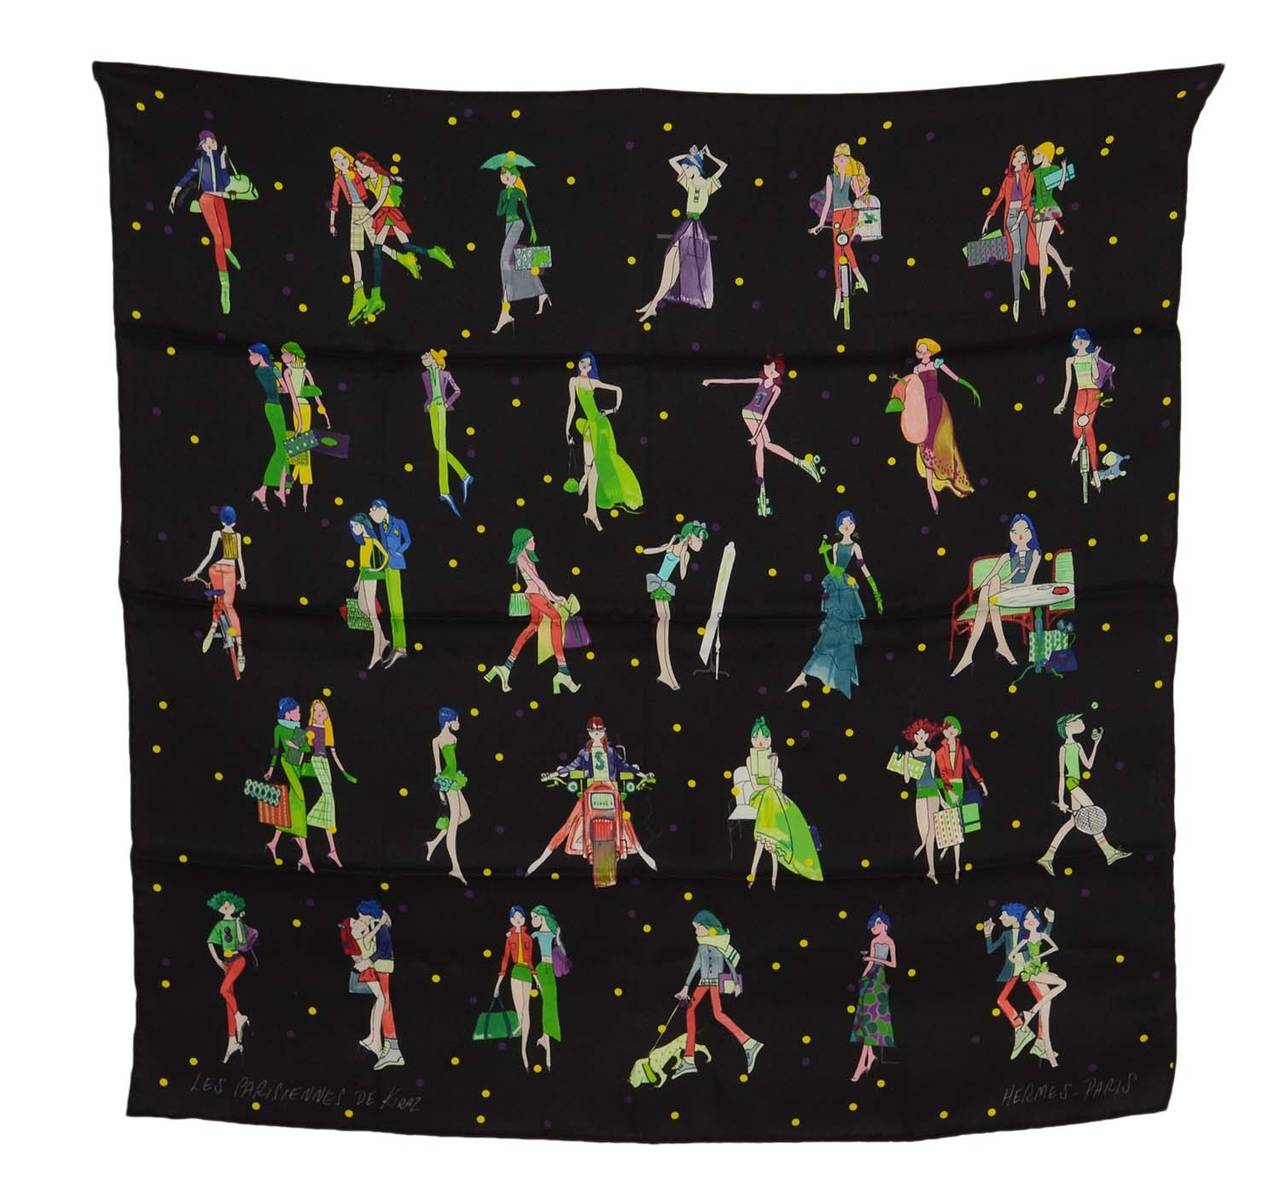 Features Parisian woman performing different actions (shopping, dancing, etc)

-Made in: France
-Color: Black with yellow, green, blue, red, and purple accents
-Composition:100% silk
-Tags: MADE IN FRANCE 100% SILK
-Current Retail: rt.